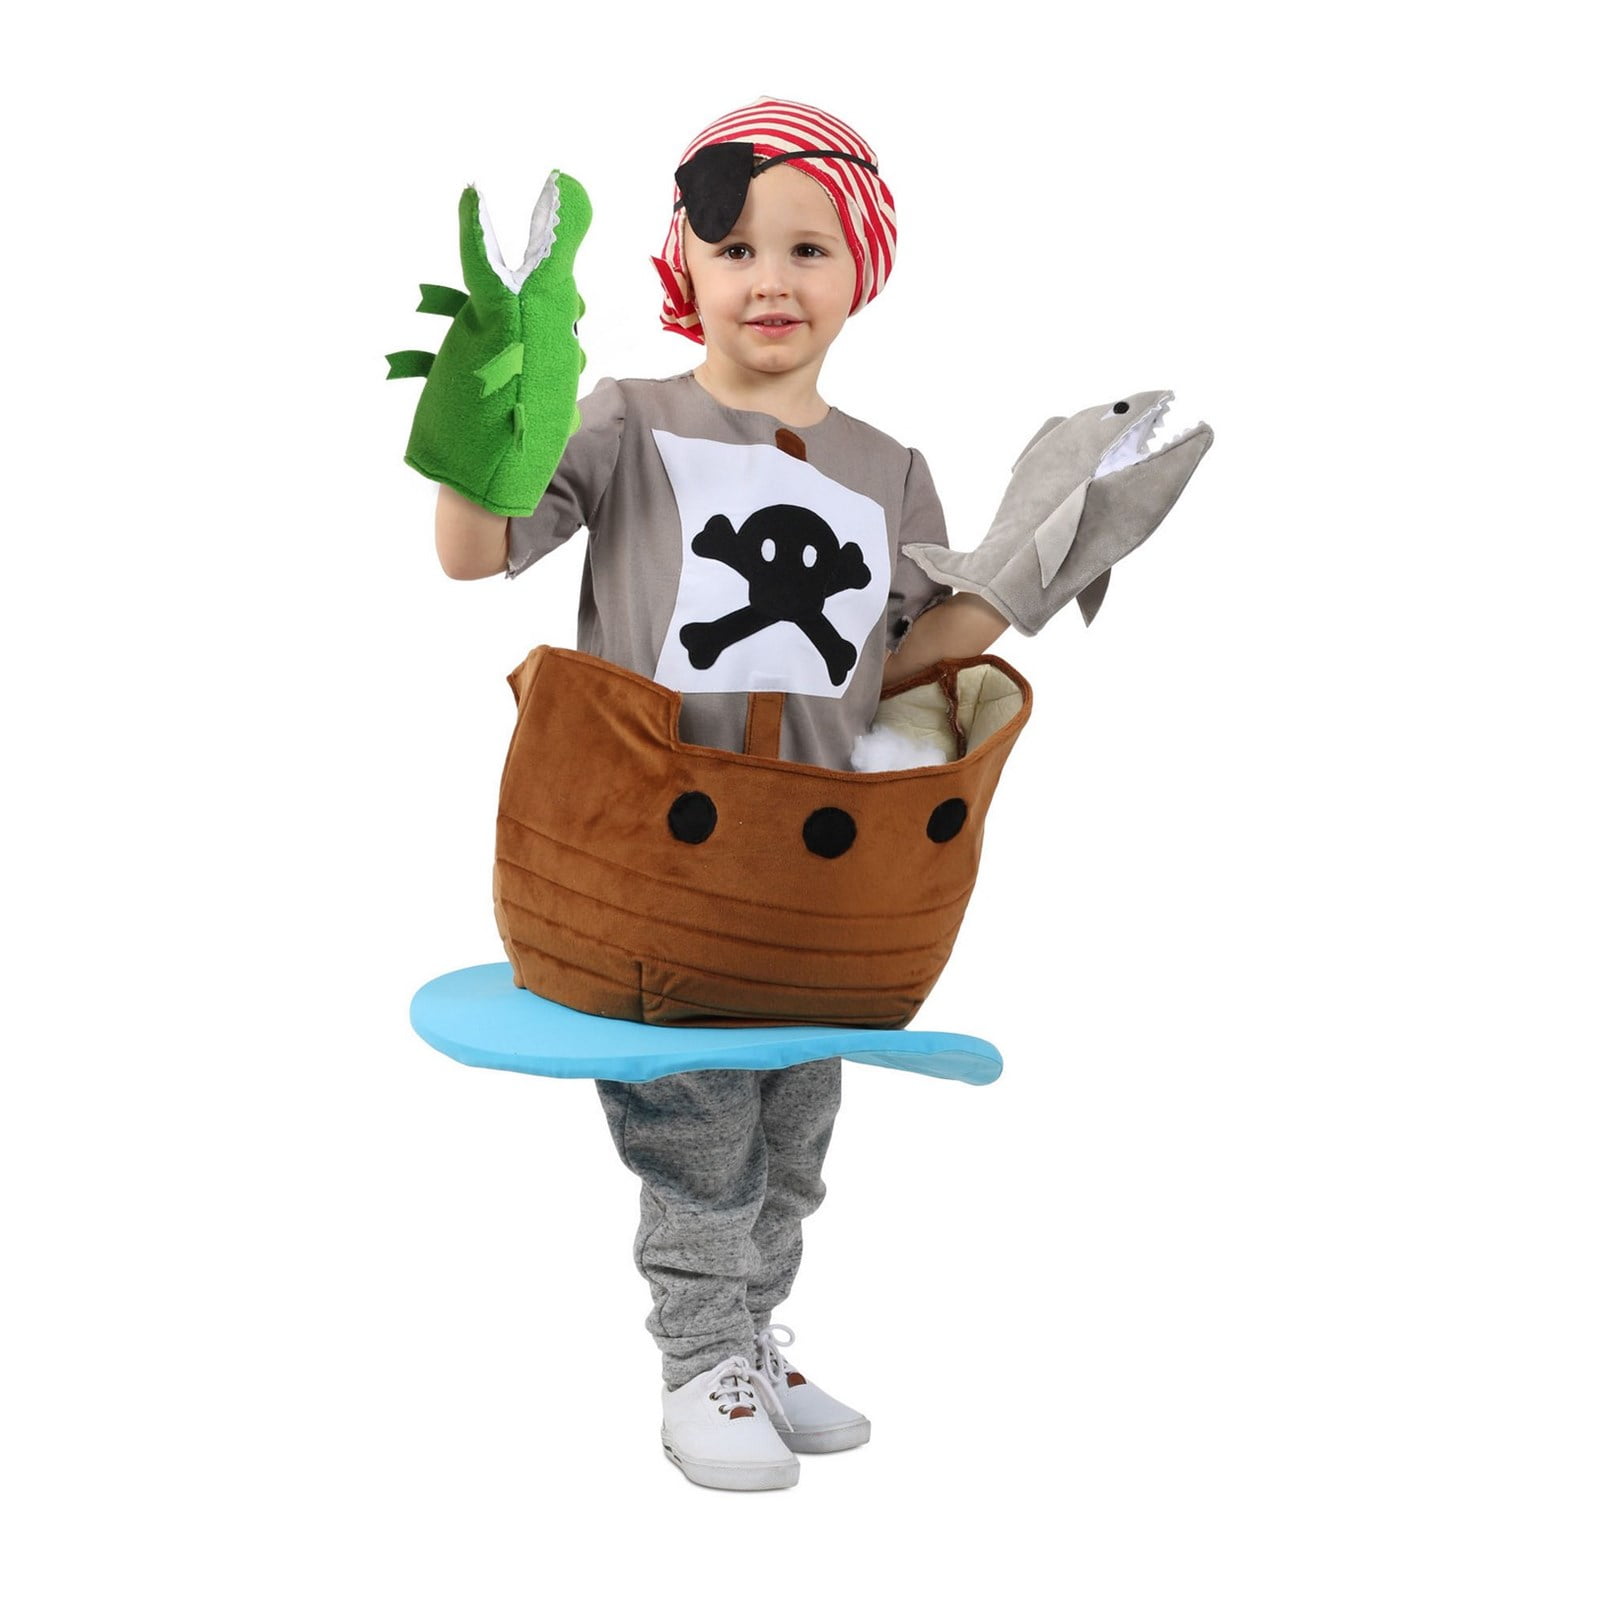 Details about   Halloween New Baby Shark Costume For Unisex Child,Kids,Toddler 3 Colors Fancy!!! 